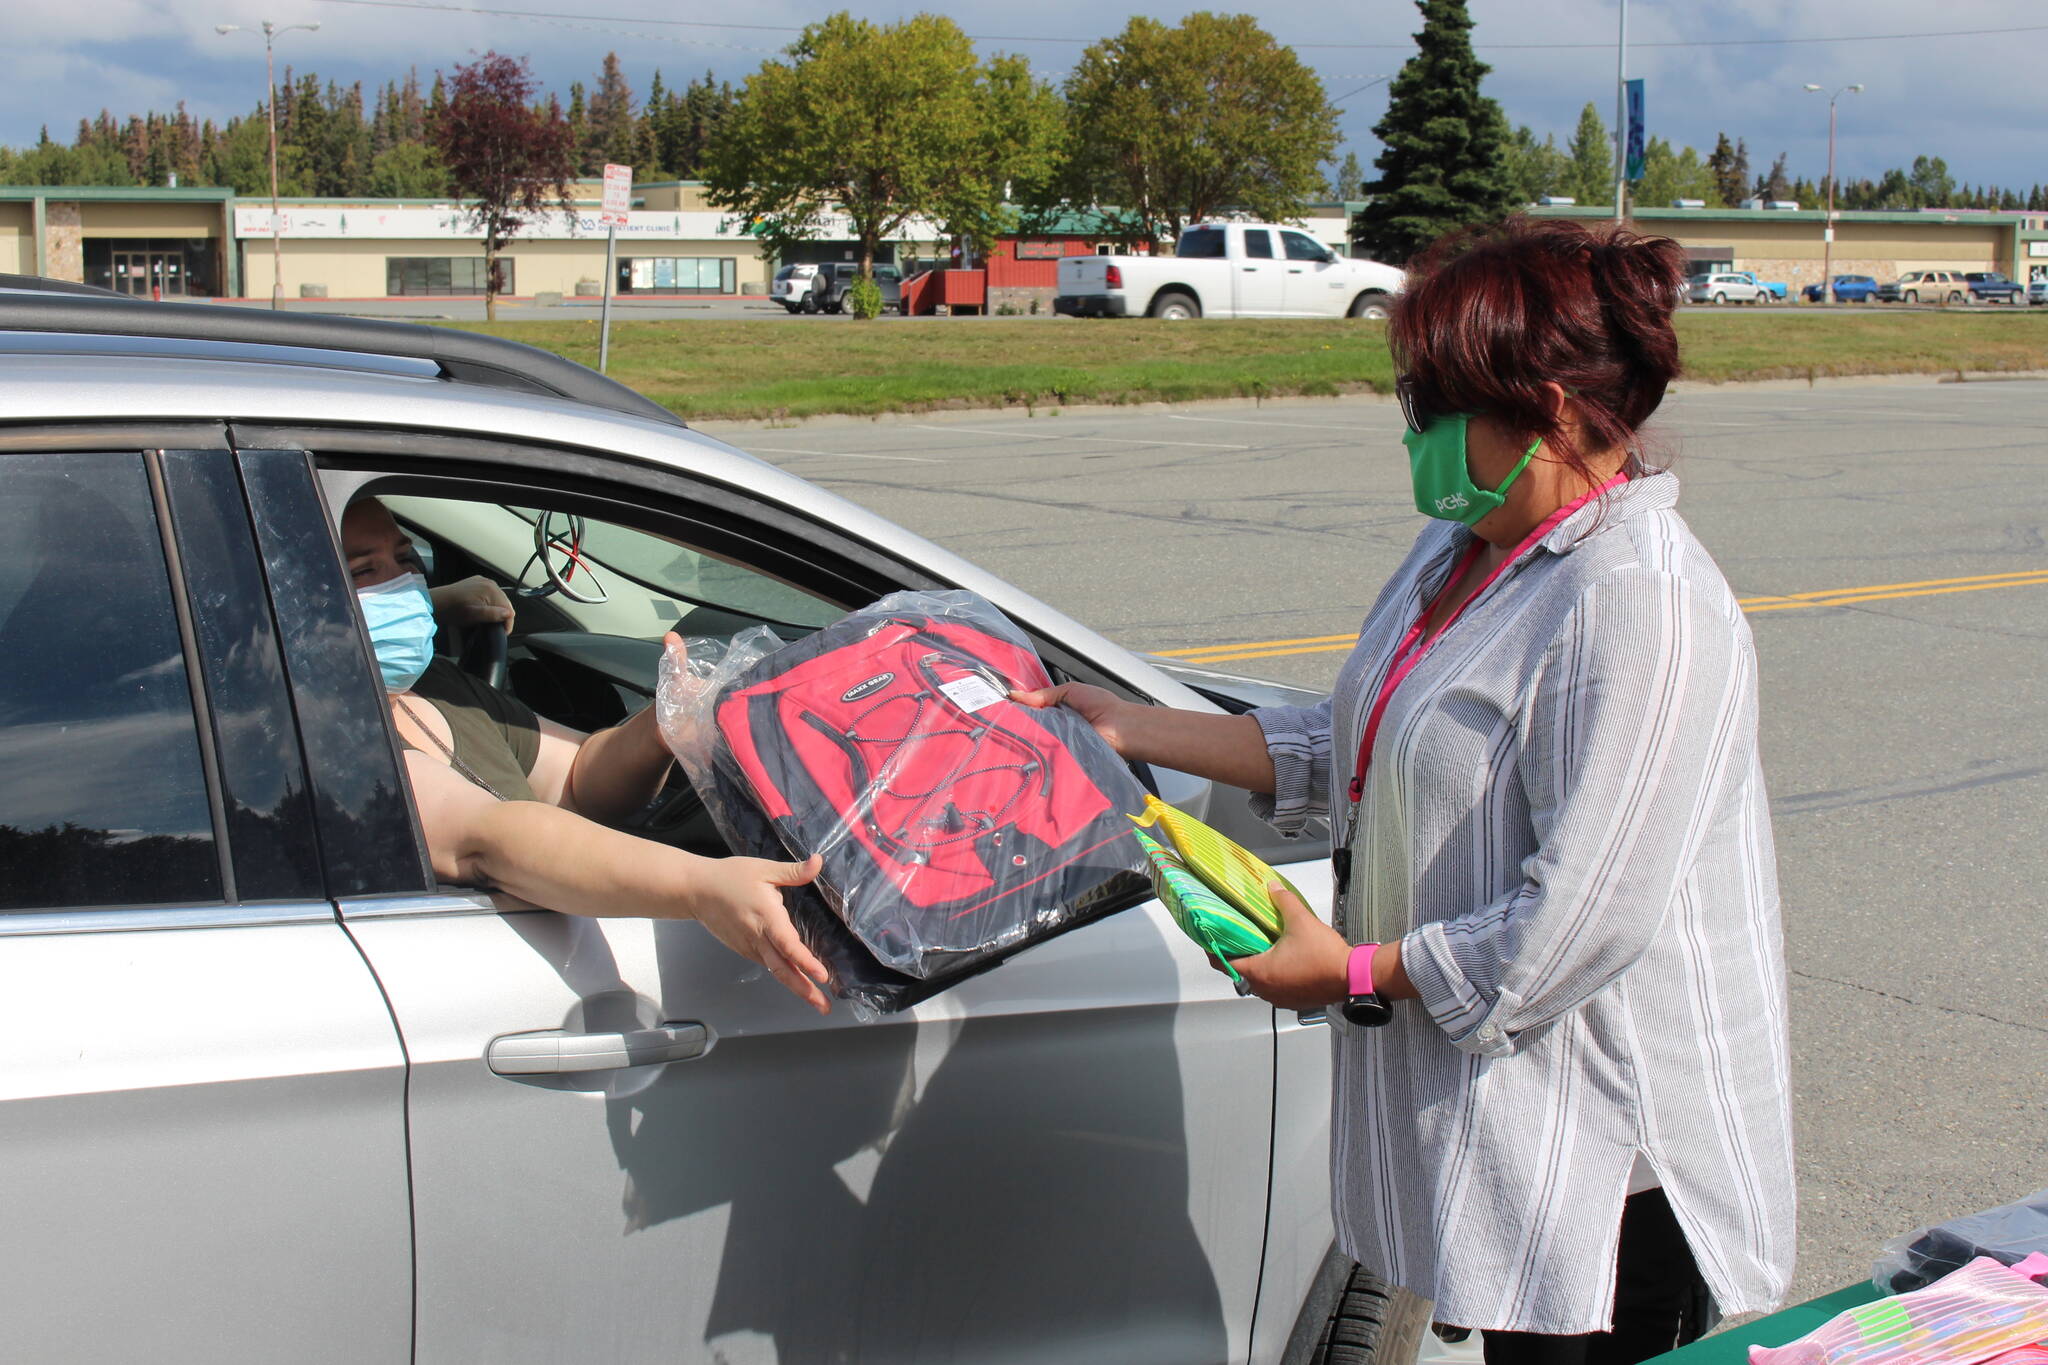 Chastity Swafford, right, gives a free backpack and school supplies to Heather Perry, left, as part of Peninsula Community Health Center’s drive-thru backpack giveaway in Kenai, Alaska on Aug. 19, 2020. (Photo by Brian Mazurek/Peninsula Clarion file)